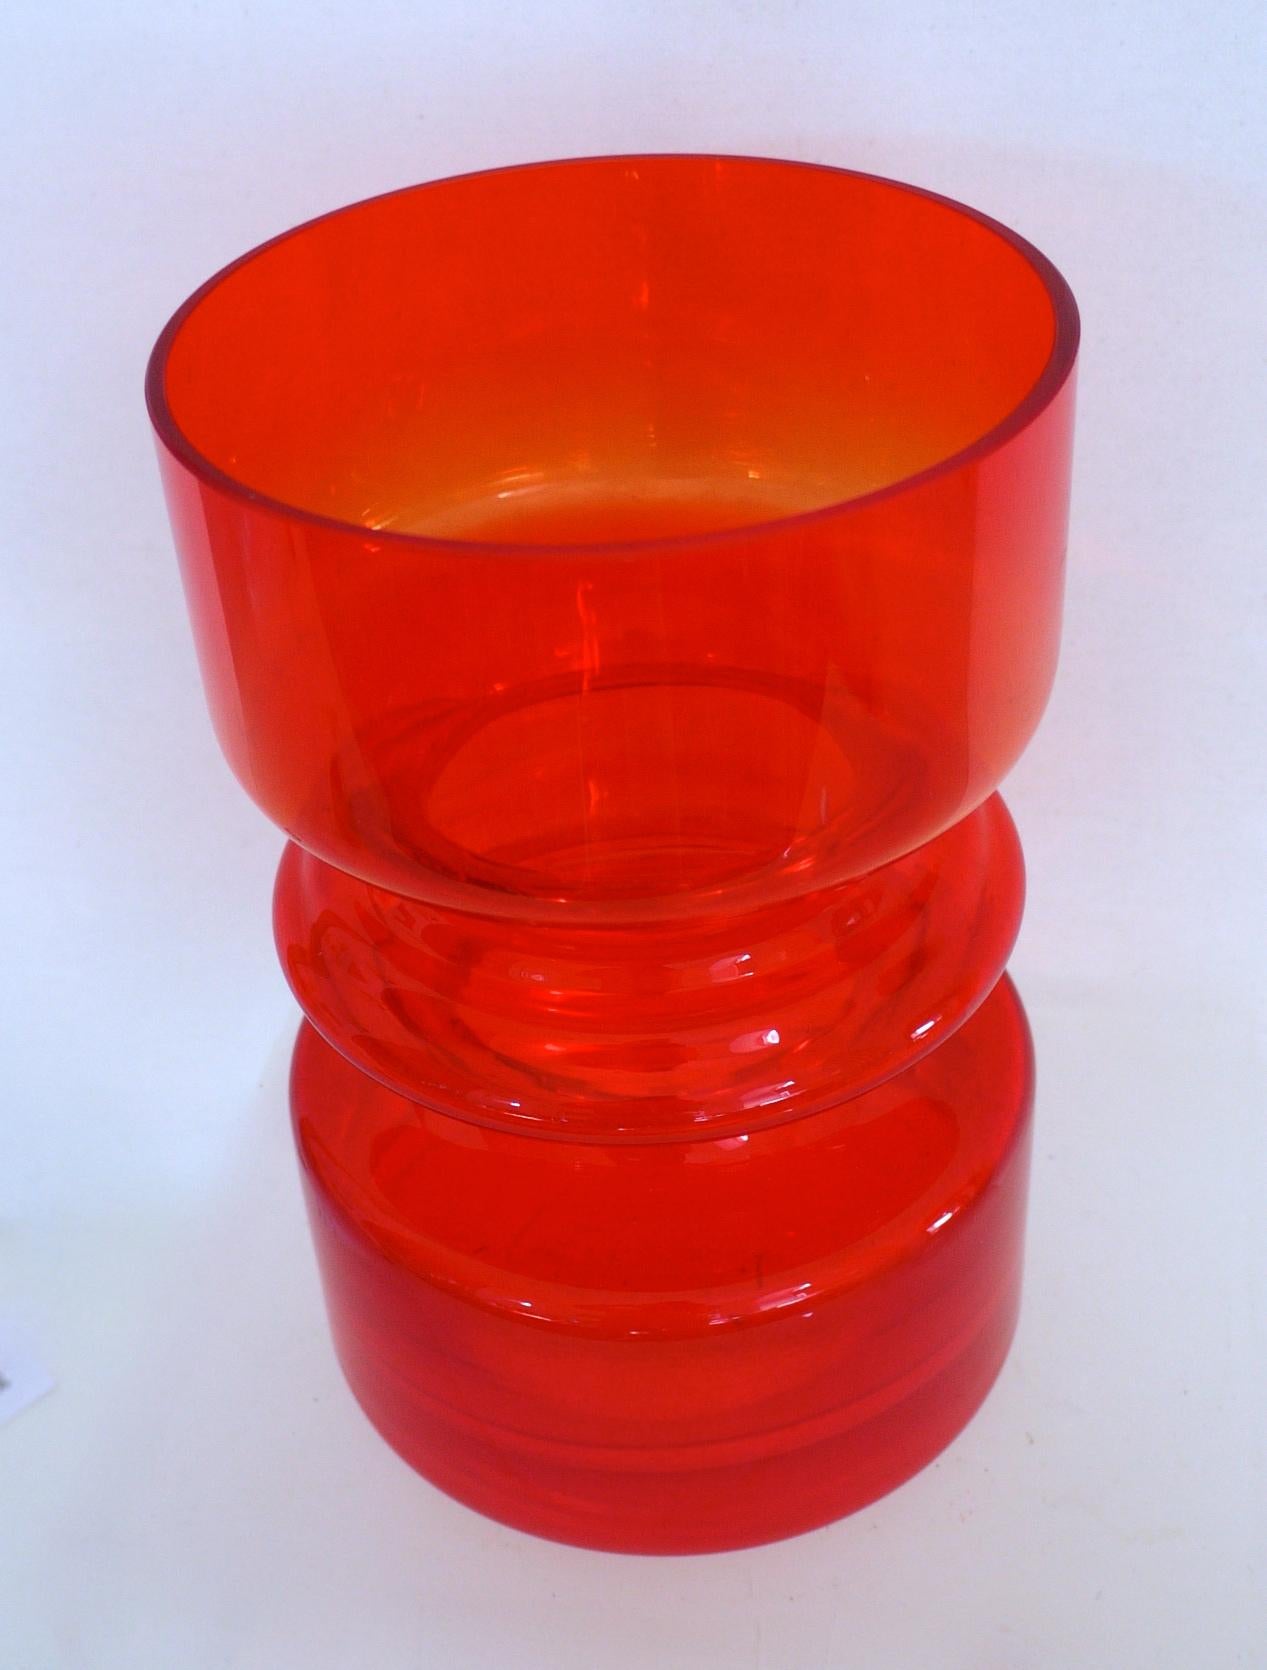 Red Hooped Glass Vase Tamara Aladin Riihimaki 'Finland' 1959 Mid-Century Modern In Good Condition For Sale In Halstead, GB